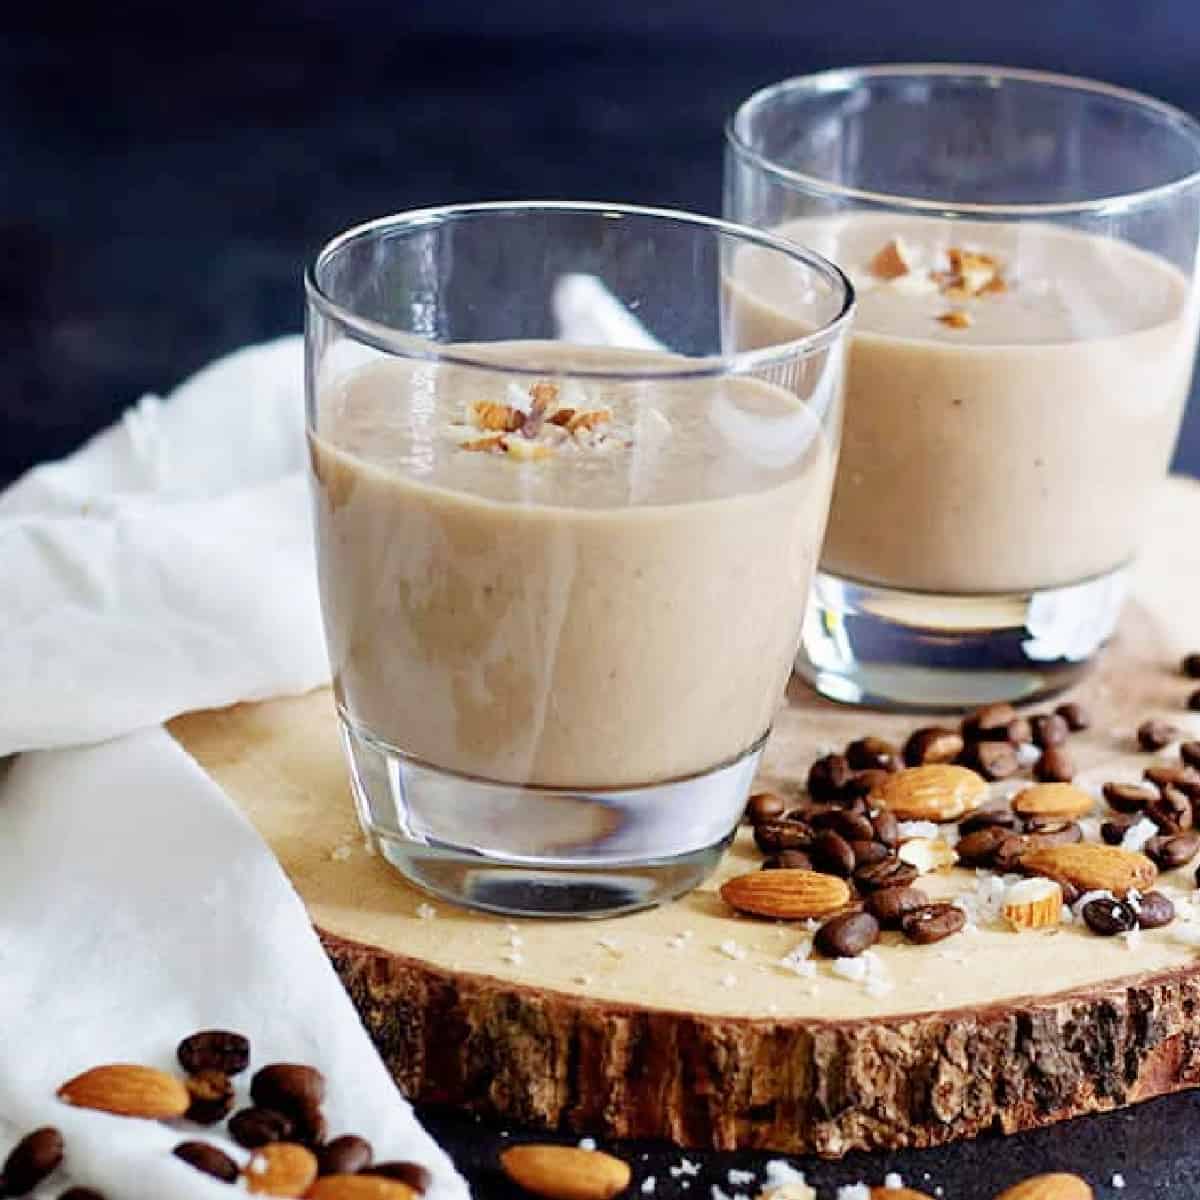 Almond Coconut Breakfast Smoothie is a full breakfast packed into a glass! With a touch of espresso, this smoothie will have you ready for a great day!
